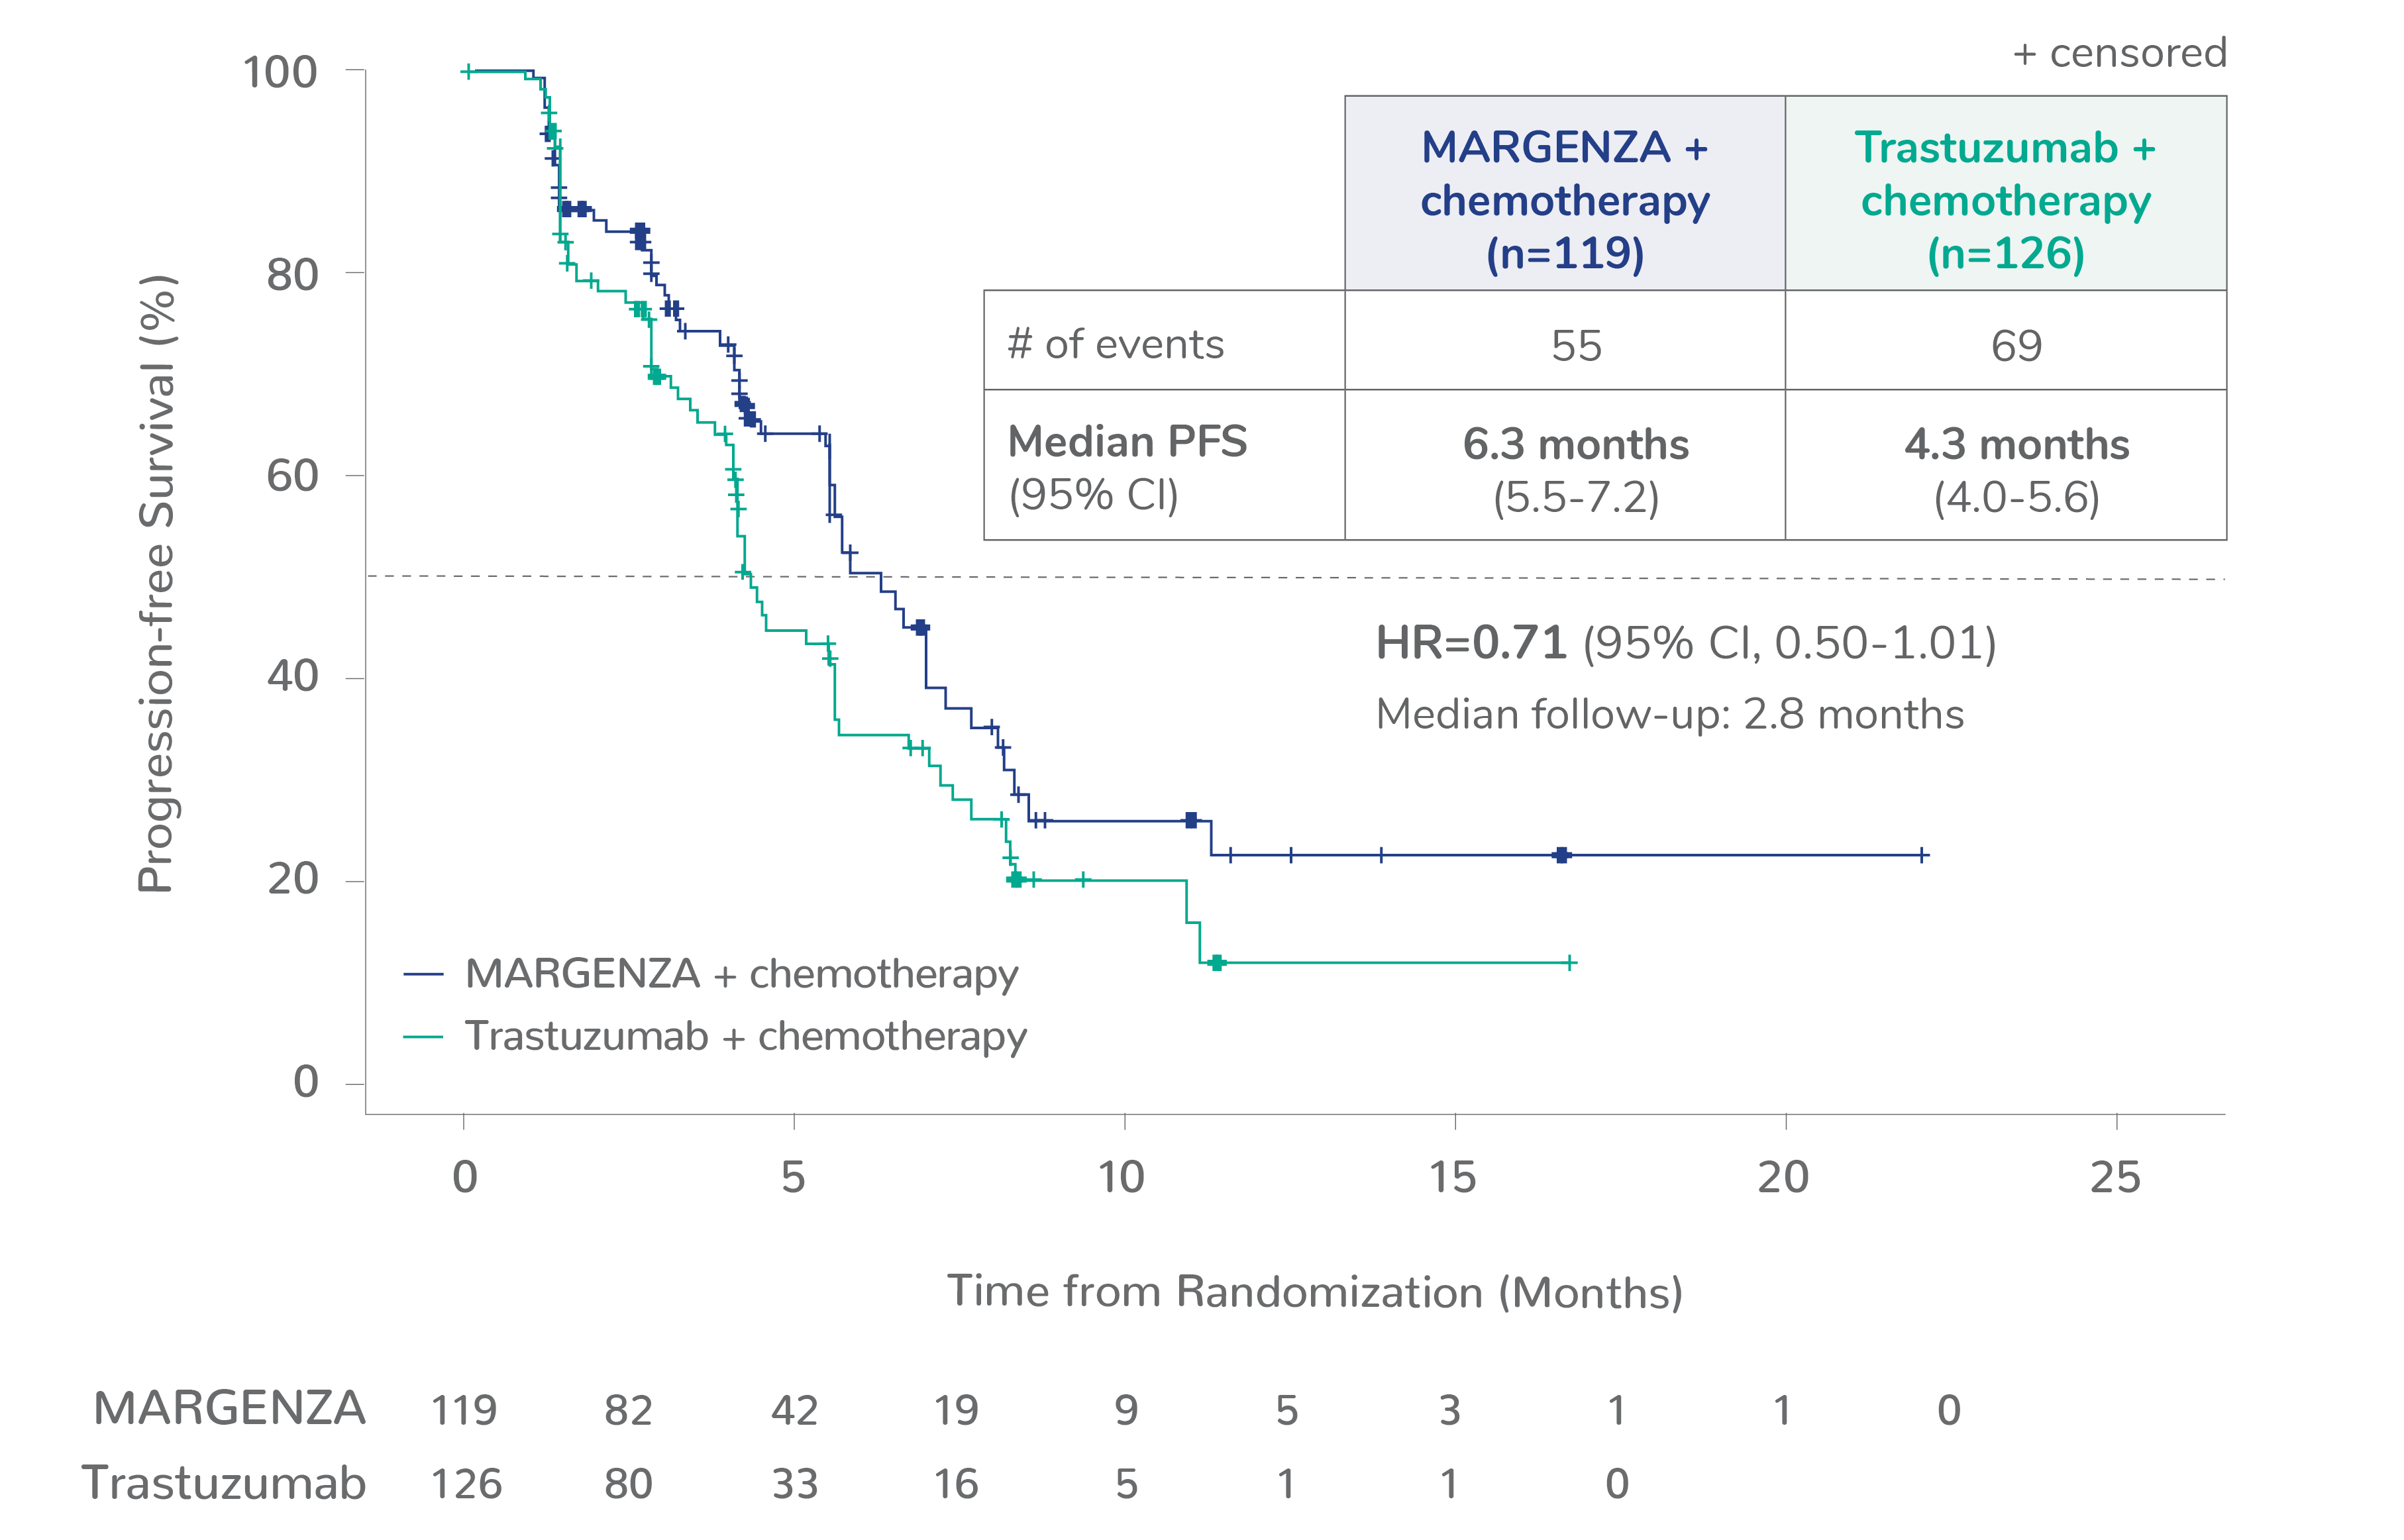 Kaplan Meyer curve showing median progression-free survival for CD16A FV genotype of 6.3 months for MARGENZA plus chemotherapy in 119 patients compared to 4.3 months for trastuzumab plus chemotherapy in 126 patients. The hazard ratio was 0.71. 